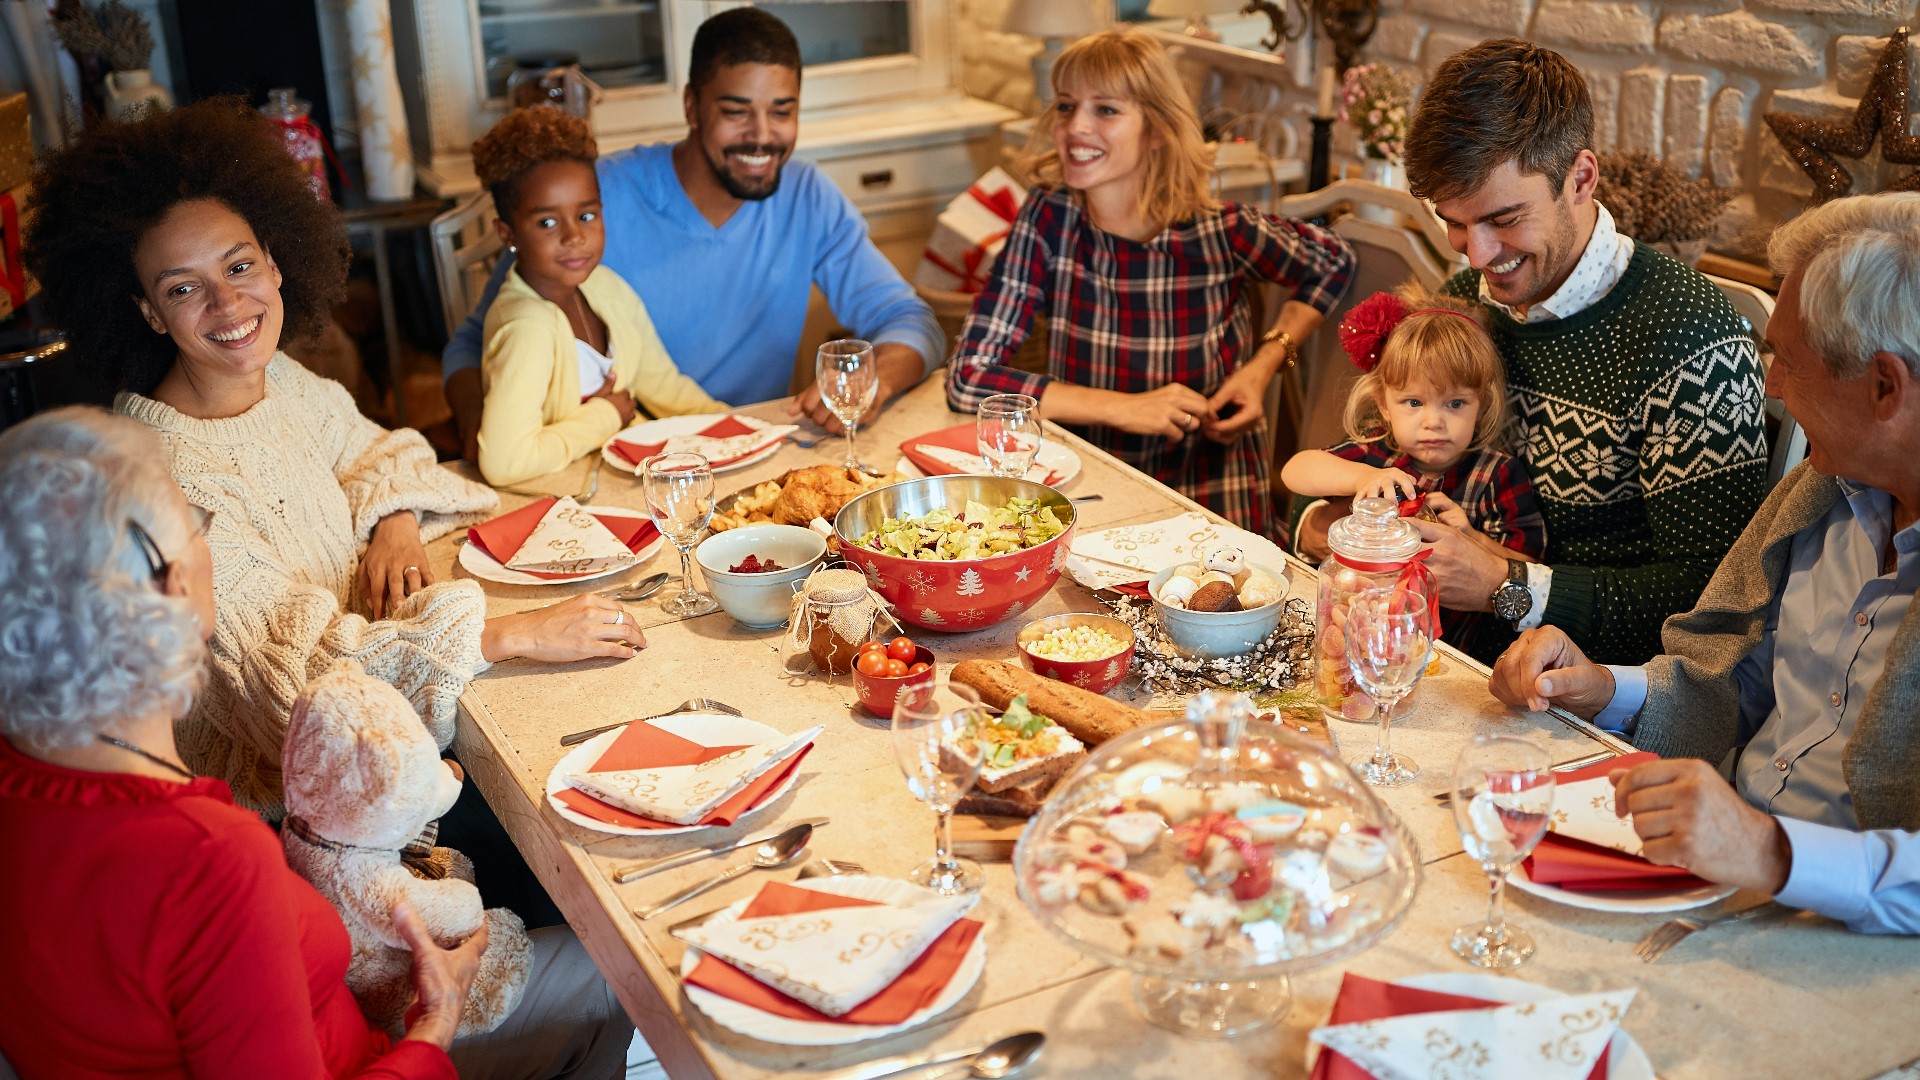 Body language expert, Blanca Cobb explains how to use nonverbal communication to make everyone more comfortable at holiday gatherings.